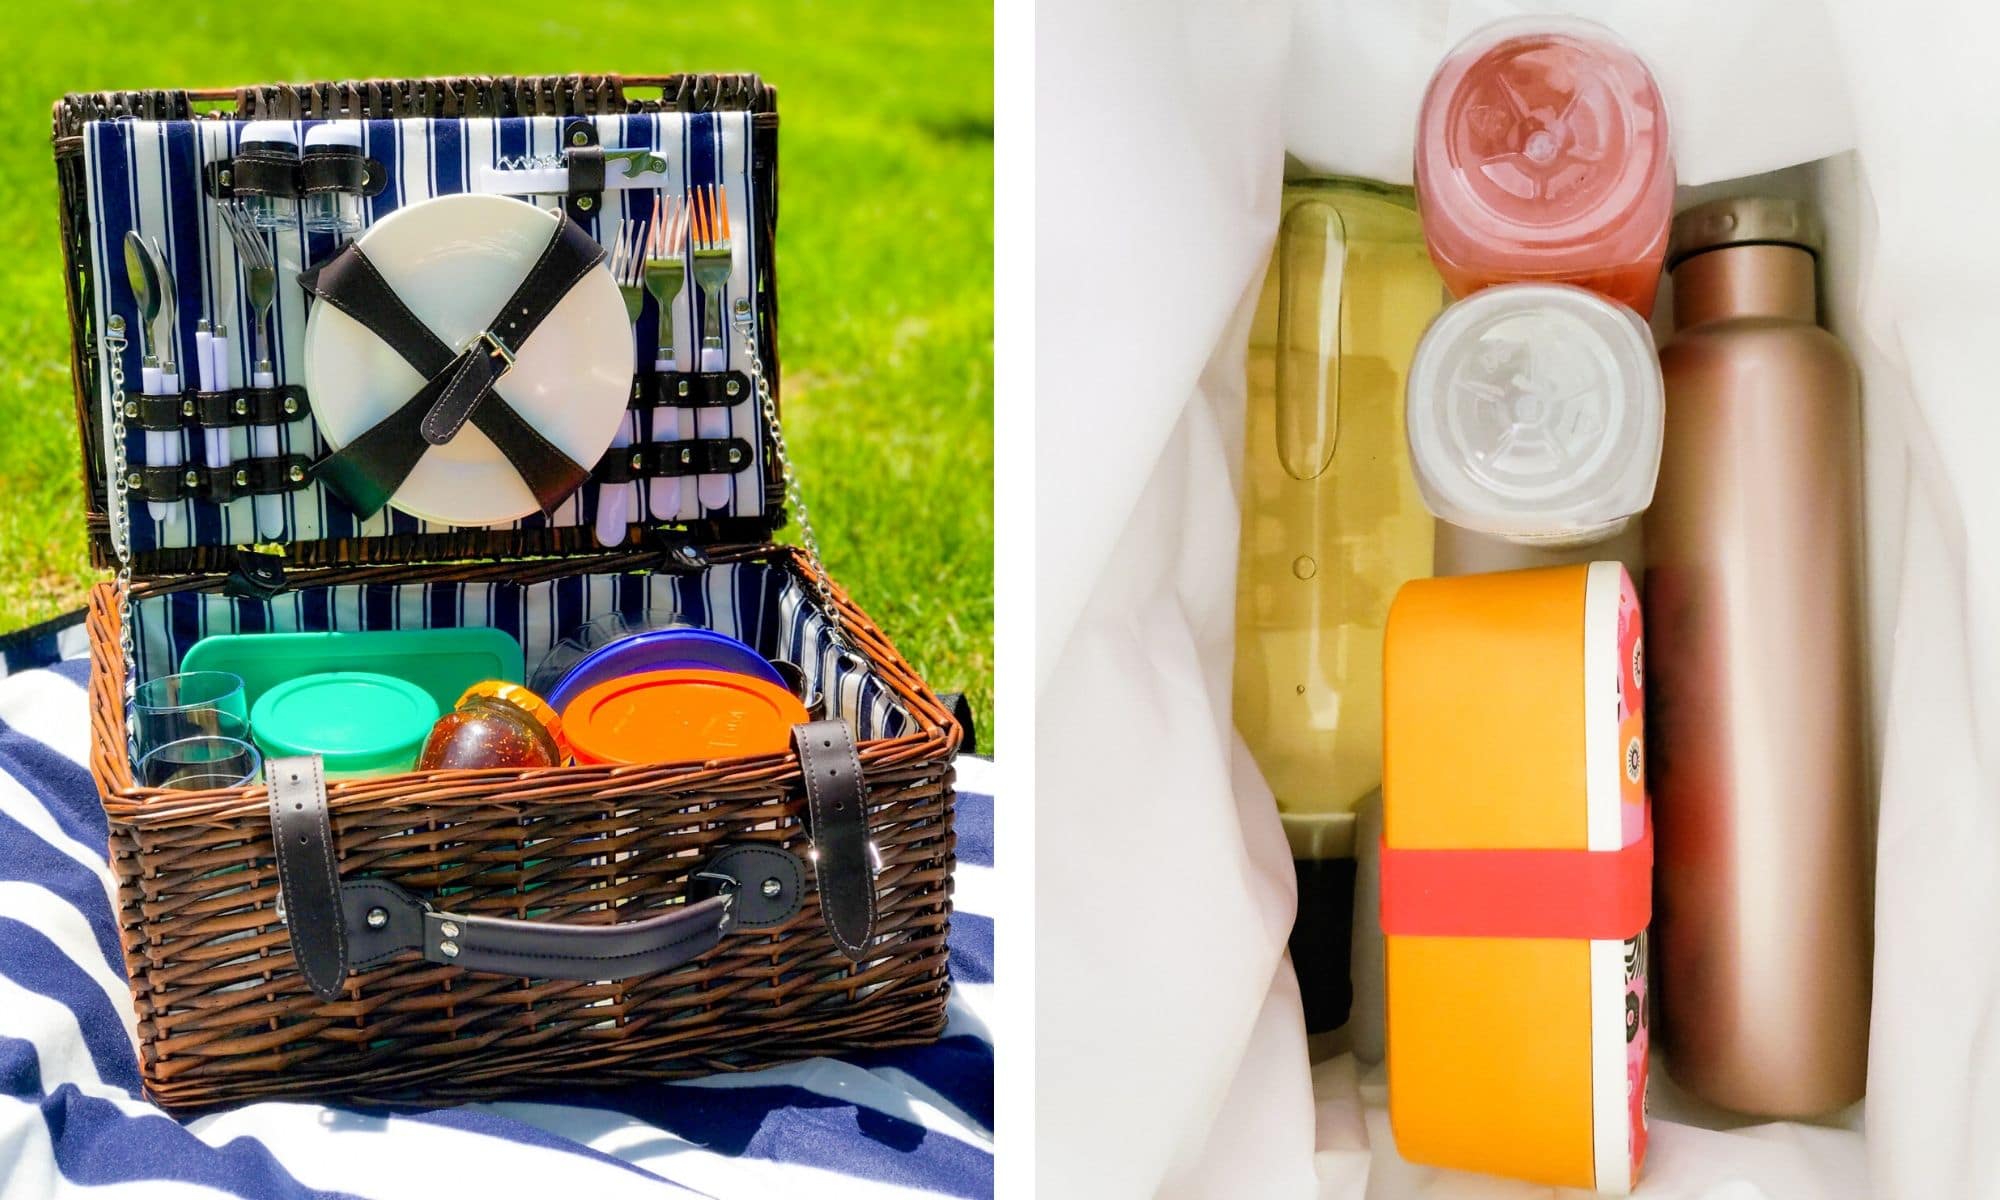 on the left is a packed picnic basket on the right is a basket of drinks